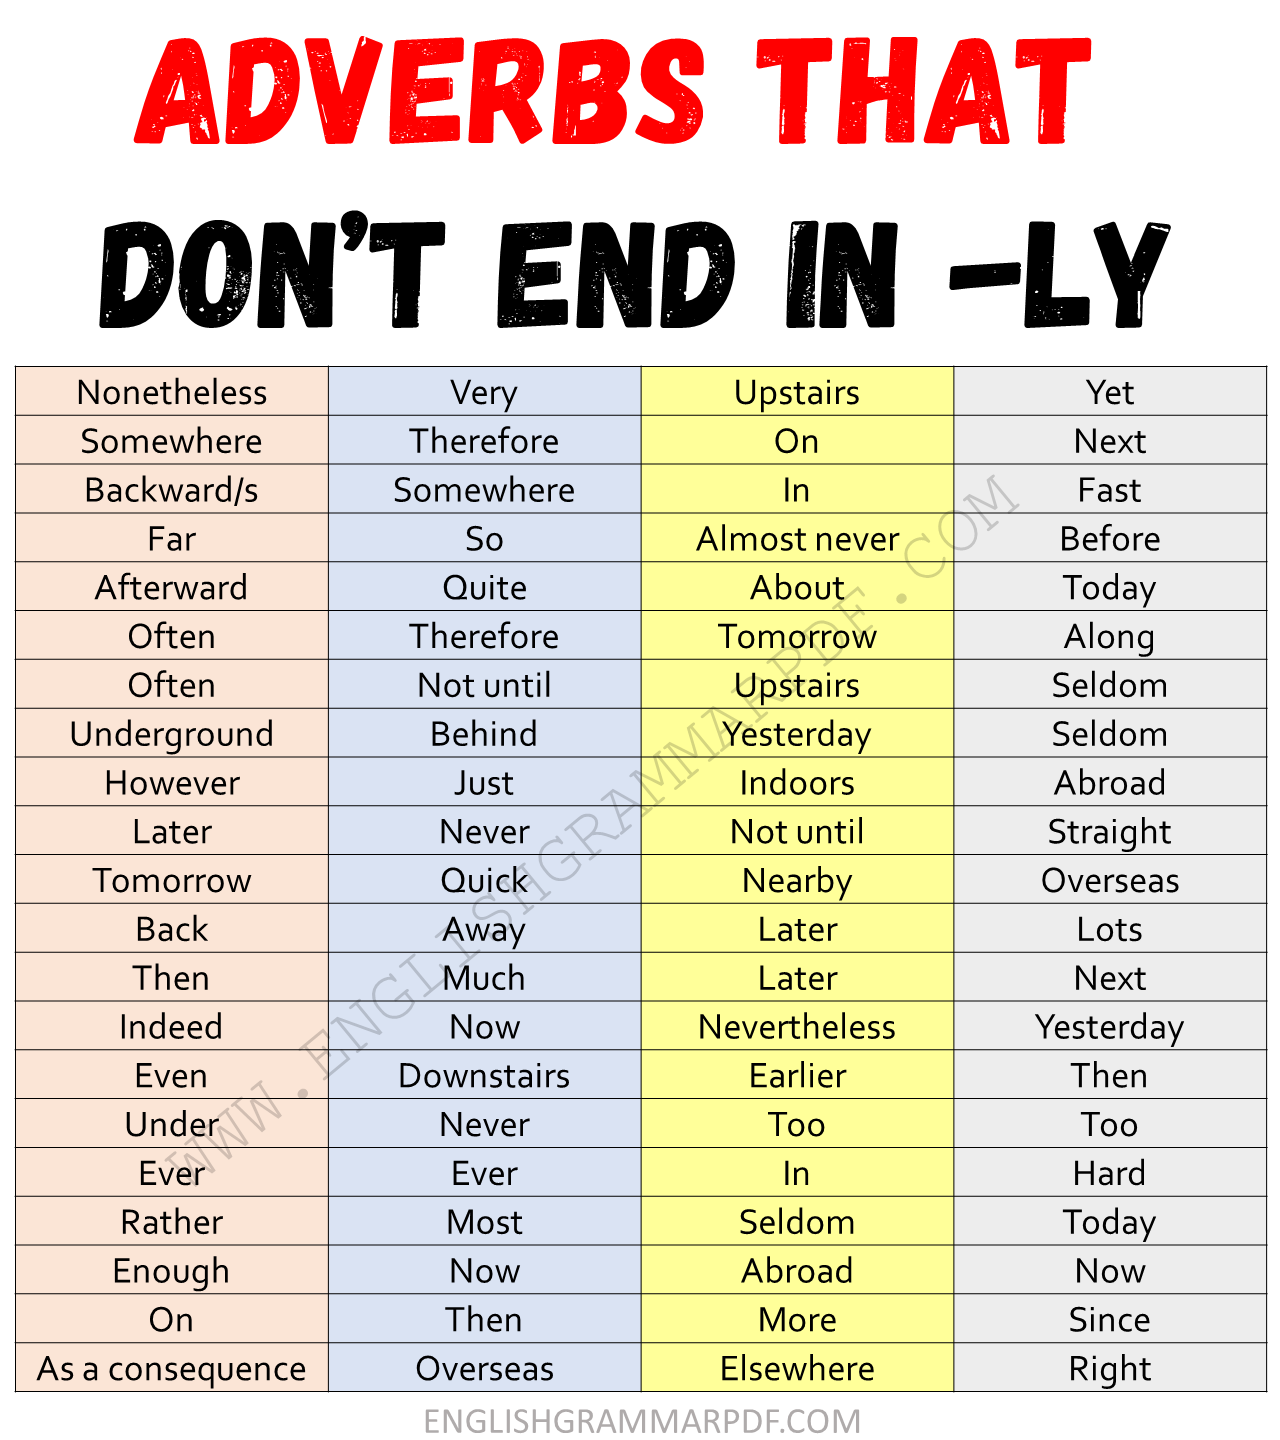 List of Adverbs that Don't Ends in LY